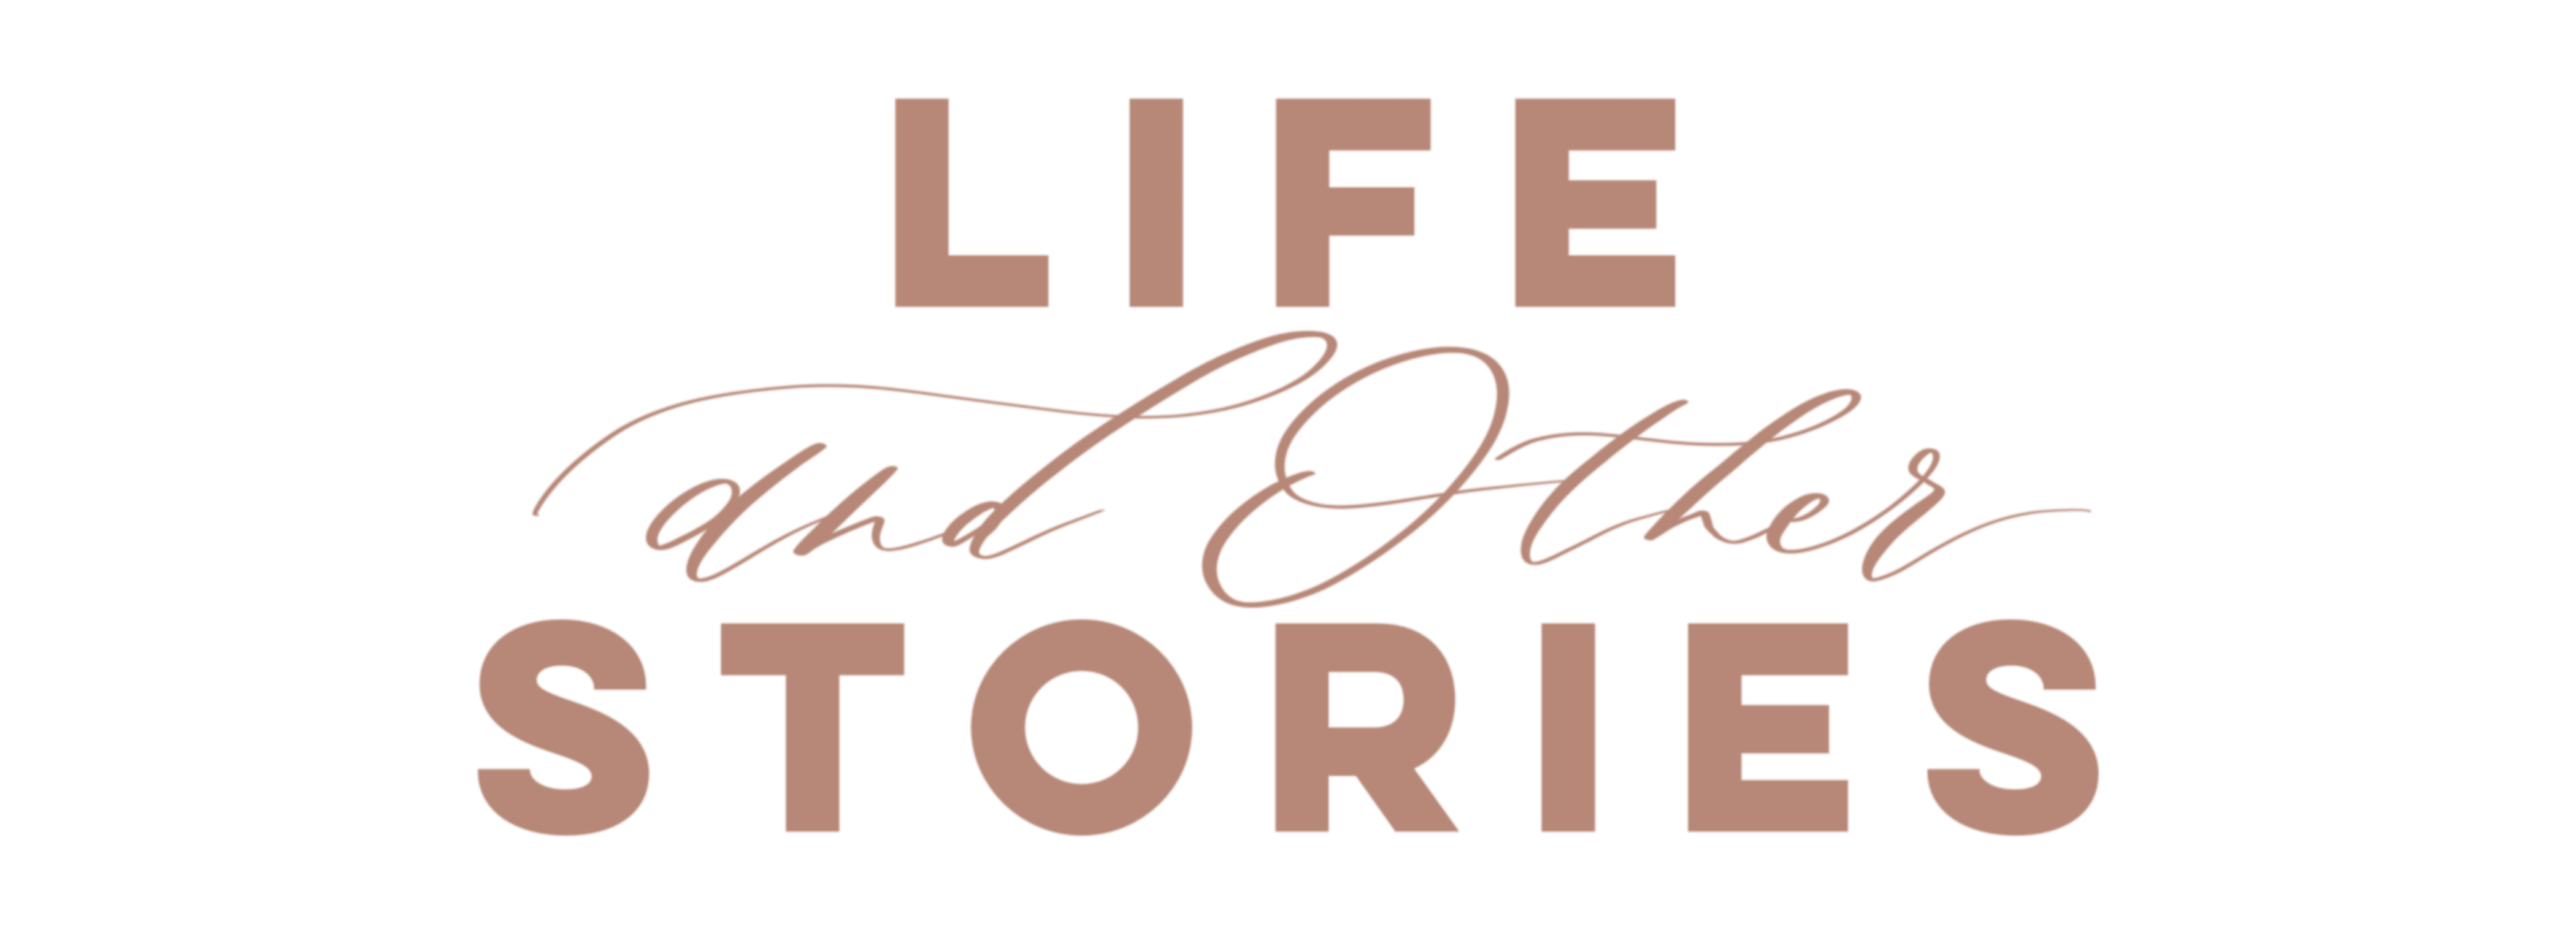 Life & Other Stories